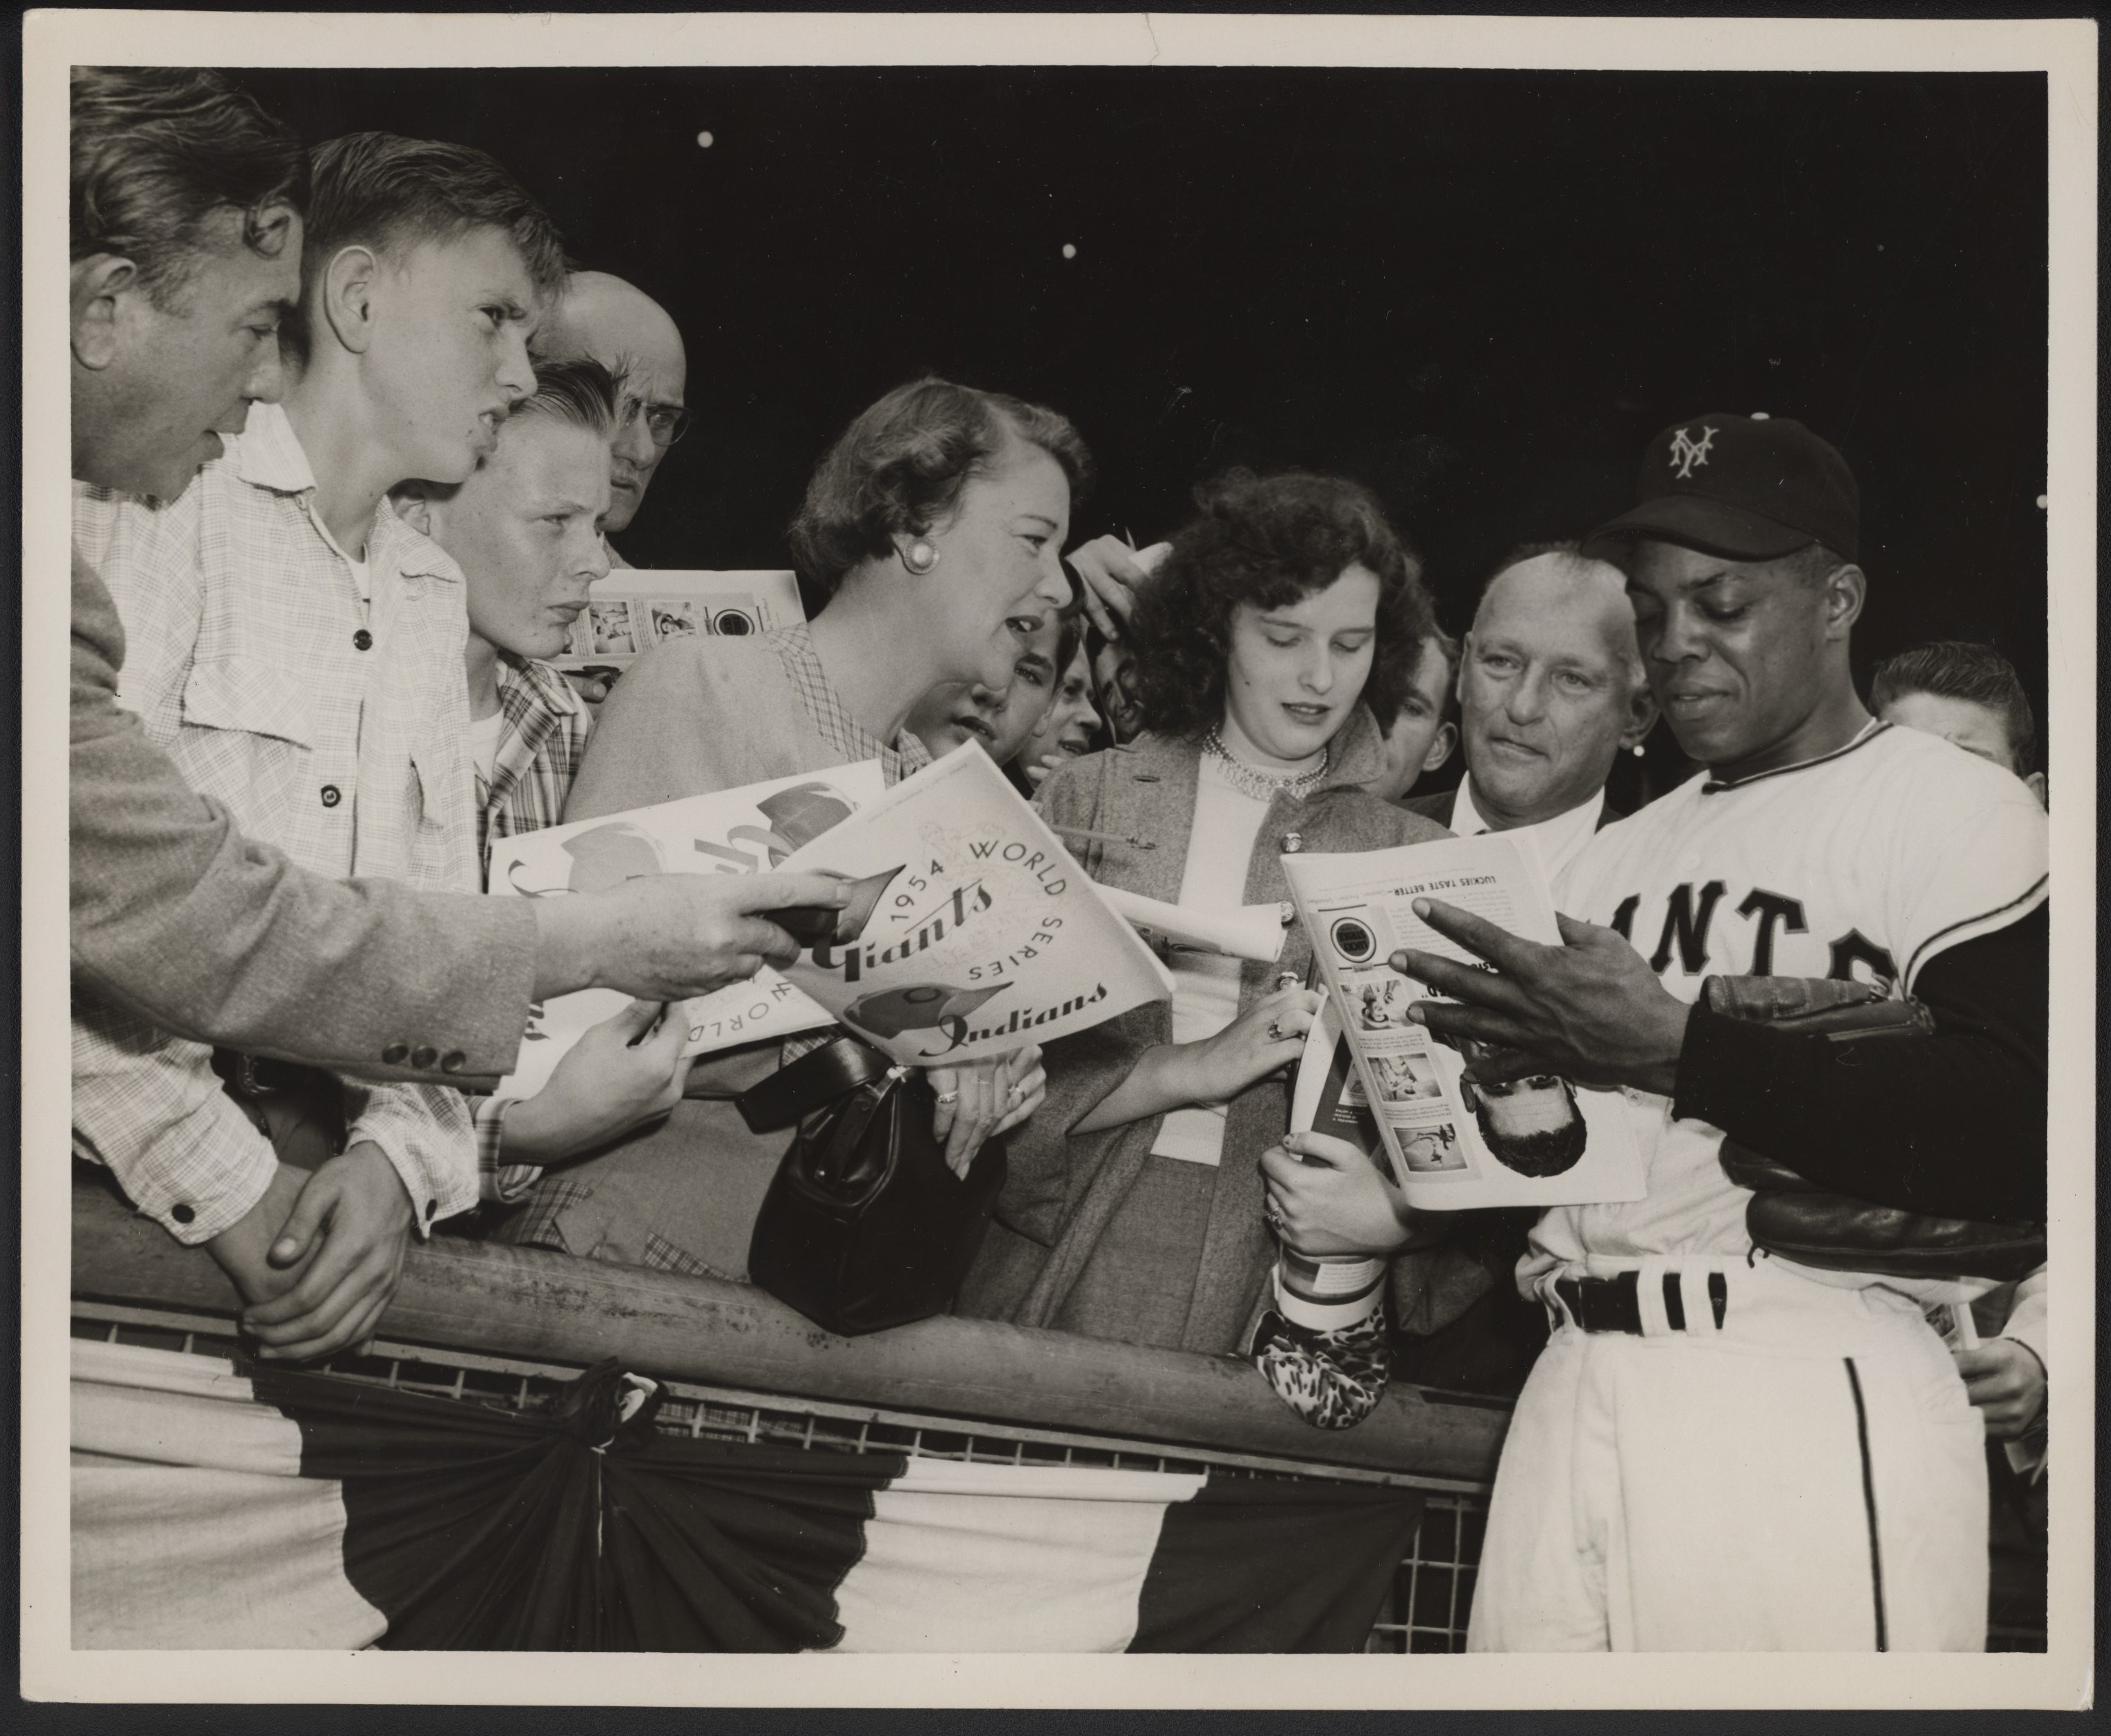 - 1954 Willie Mays Signs Autographs at World Series Type I Press Photo